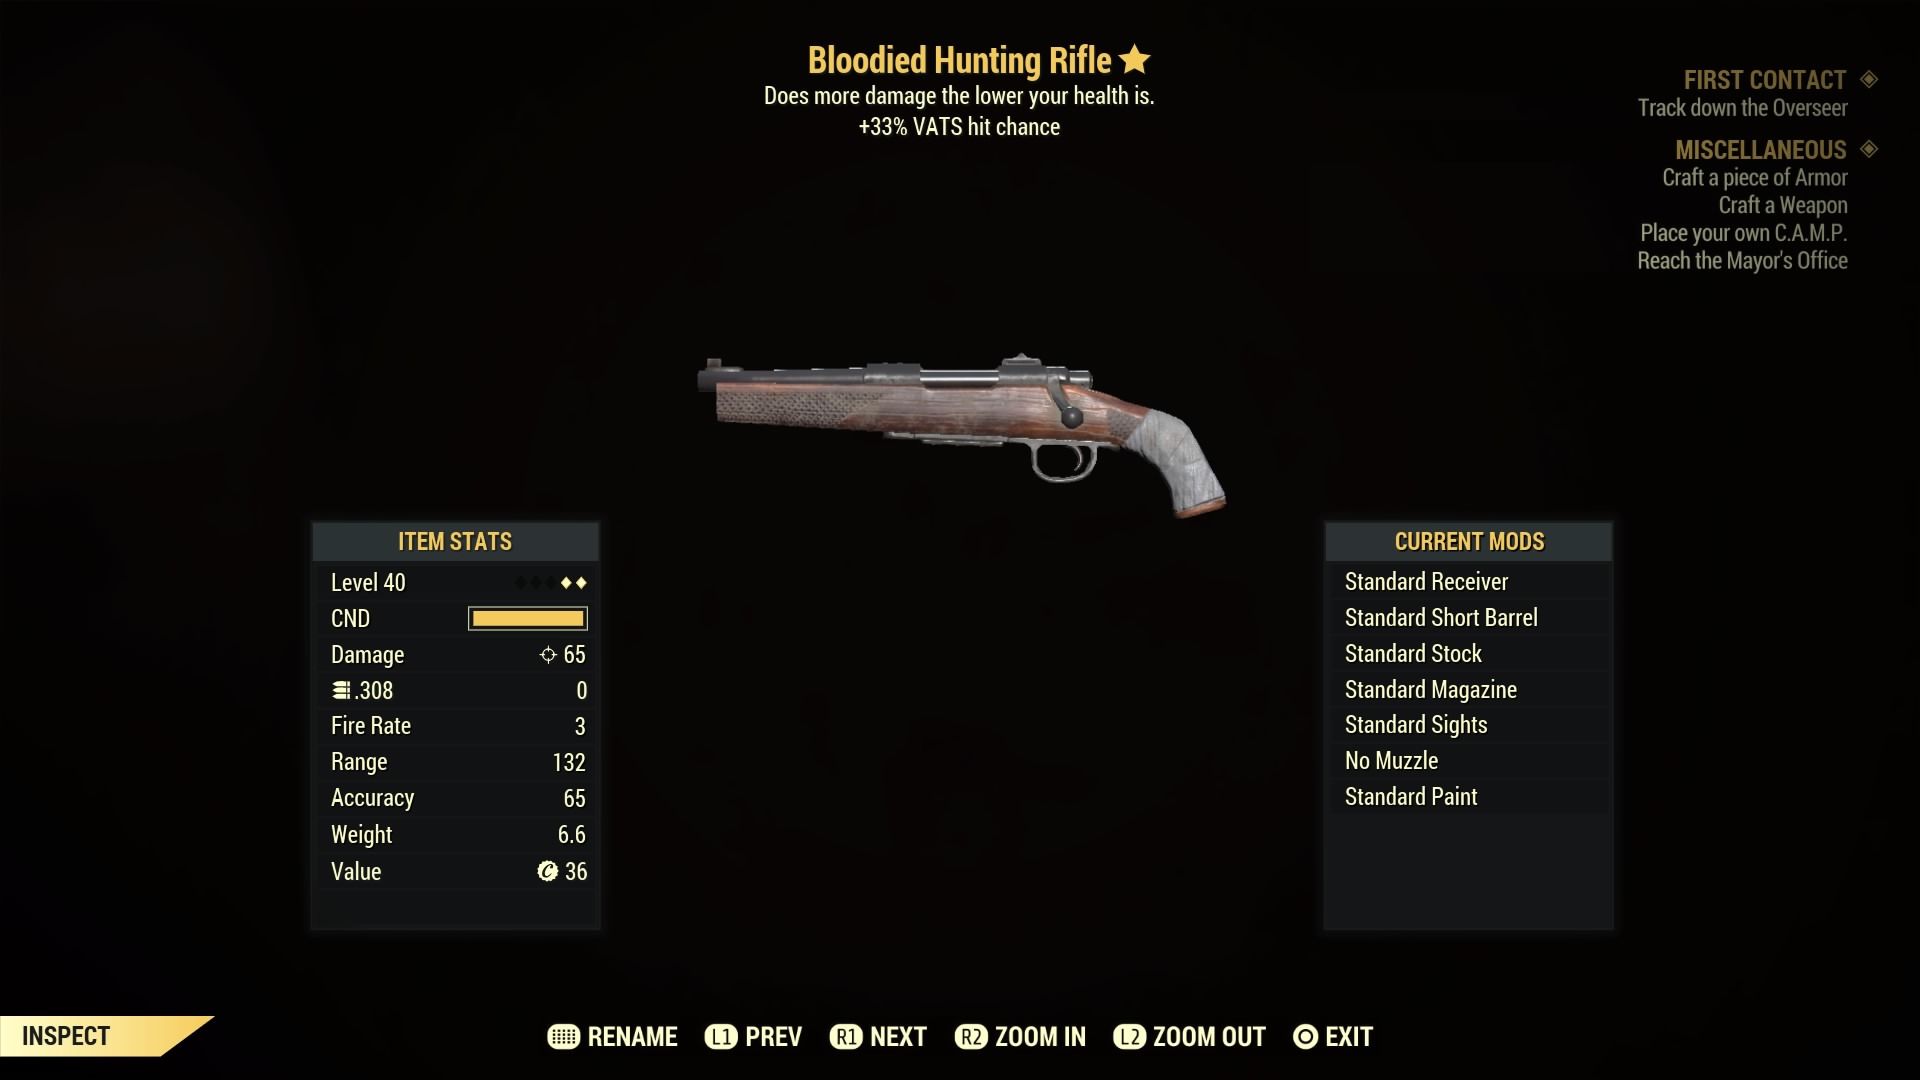 Fallout 76 Bloodied Hunting Rifle - Level 40